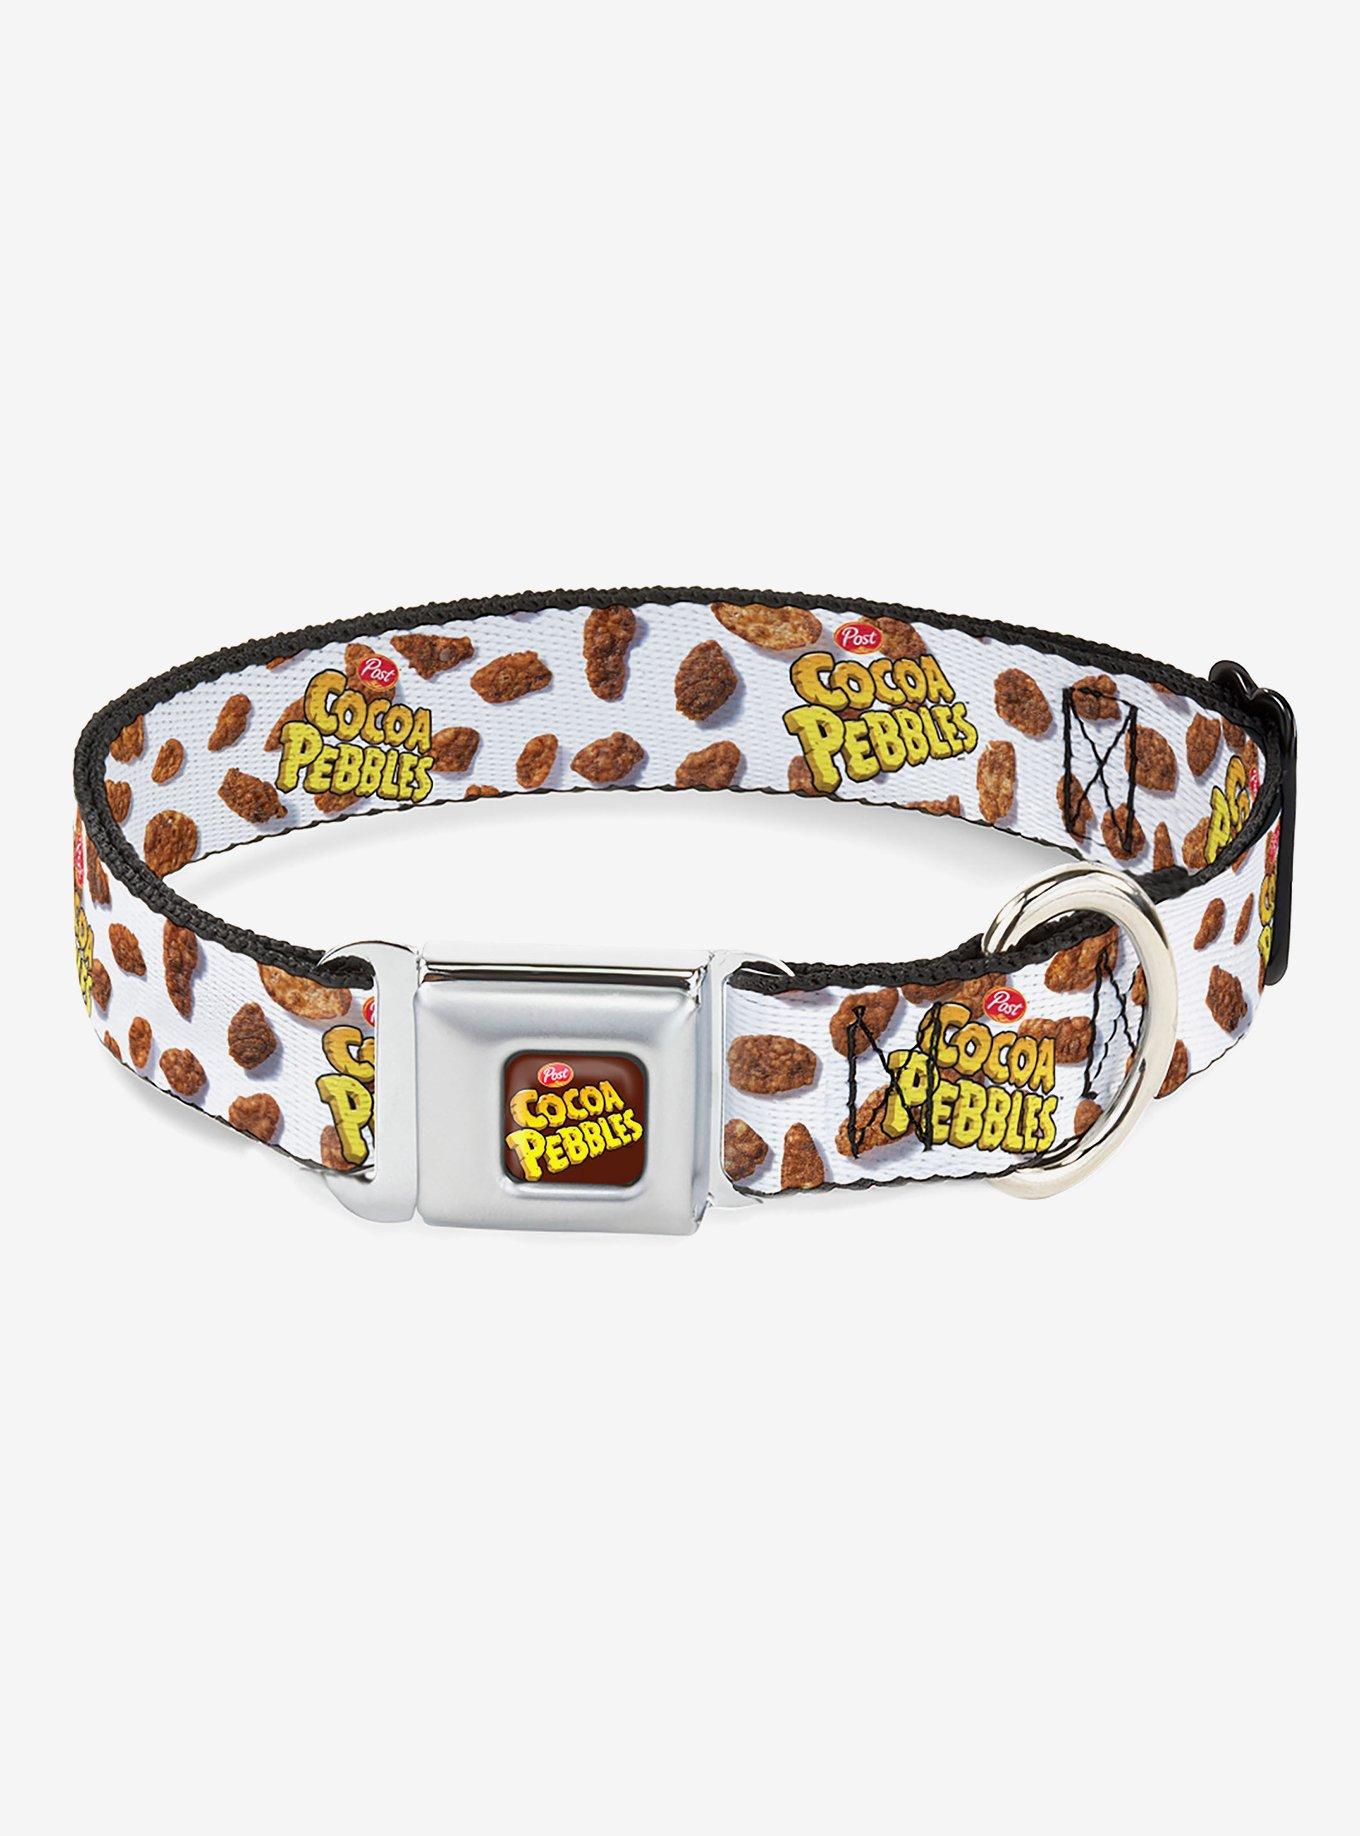 The Flintstones Cocoa Pebbles & Cereal Scattered Seatbelt Buckle Dog Collar, BRIGHT WHITE, hi-res